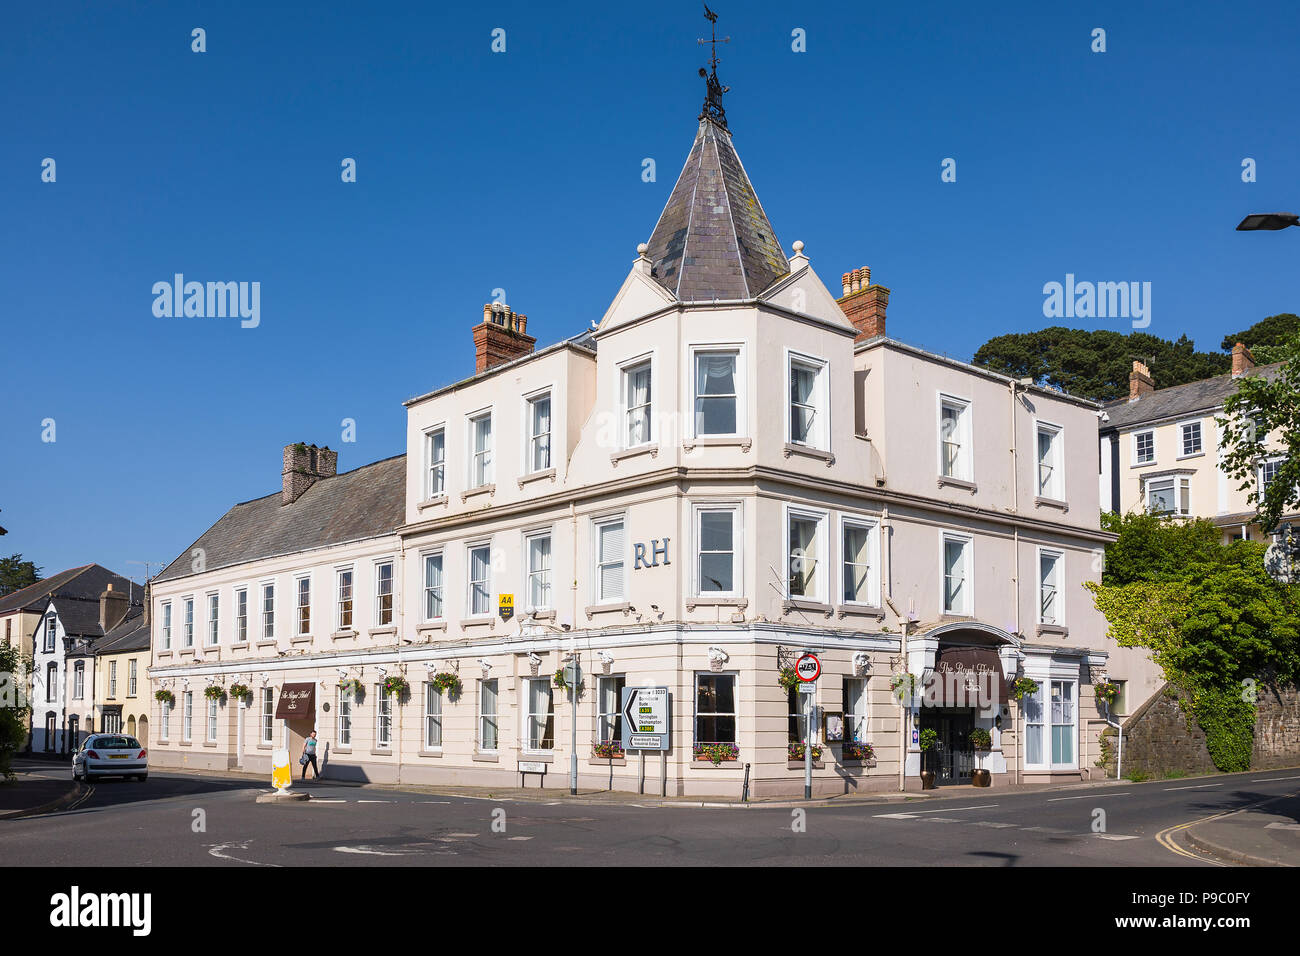 The Royal Hotel in Bideford Devon England UK - one of the many white buildings in the ancient West Country town Stock Photo